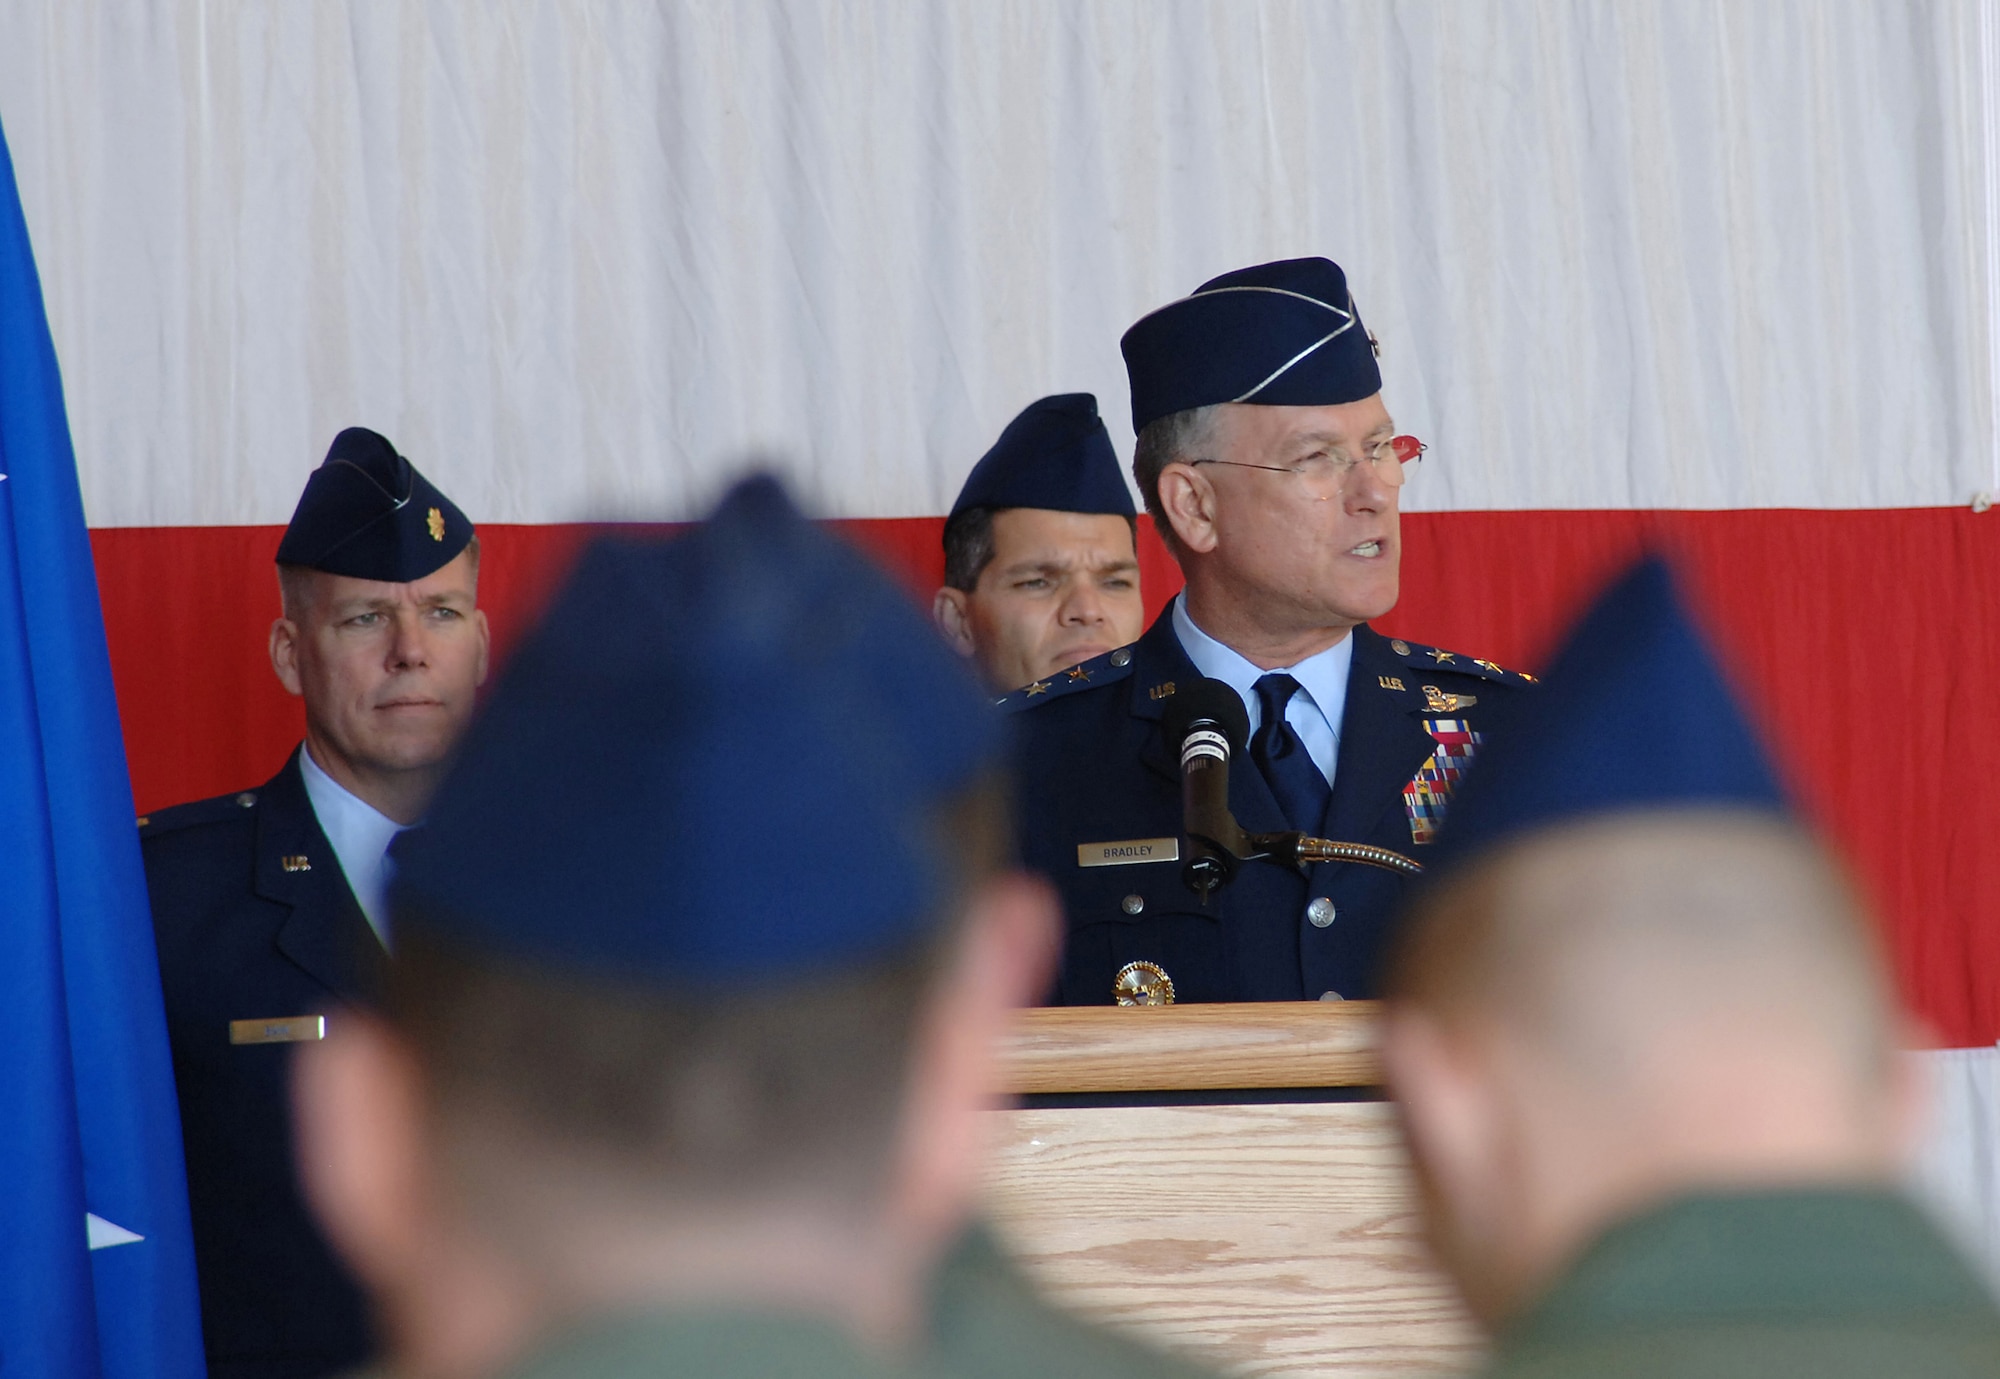 Lt. Gen. John Bradley, chief of Air Force Reserve and commander of Air Force Reserve Command, speaks to members of the newly activated 310th Space Wing at the activation ceremony for AFRC's first-ever space wing April 4, at Peterson Air Force Base, Colo.

The 310th provides its gaining major command, Air Force Space Command, with experienced people in seven space squadrons to man space-based systems including Defense Meteorological satellites for weather observation, Midcourse Space Experiment satellite to conduct space surveillance, the Space-Based Infrared System for early missile warning and Global Positioning System satellites used for navigation.  

The wing also includes a test squadron, several base support squadrons, medical staff and the Reserve National Security Space Institute.  In all, ten squadrons, five stand-alone flights and the institute report to the 310th SW.

(U.S. Air Force Photo/Amber K. Whittington)